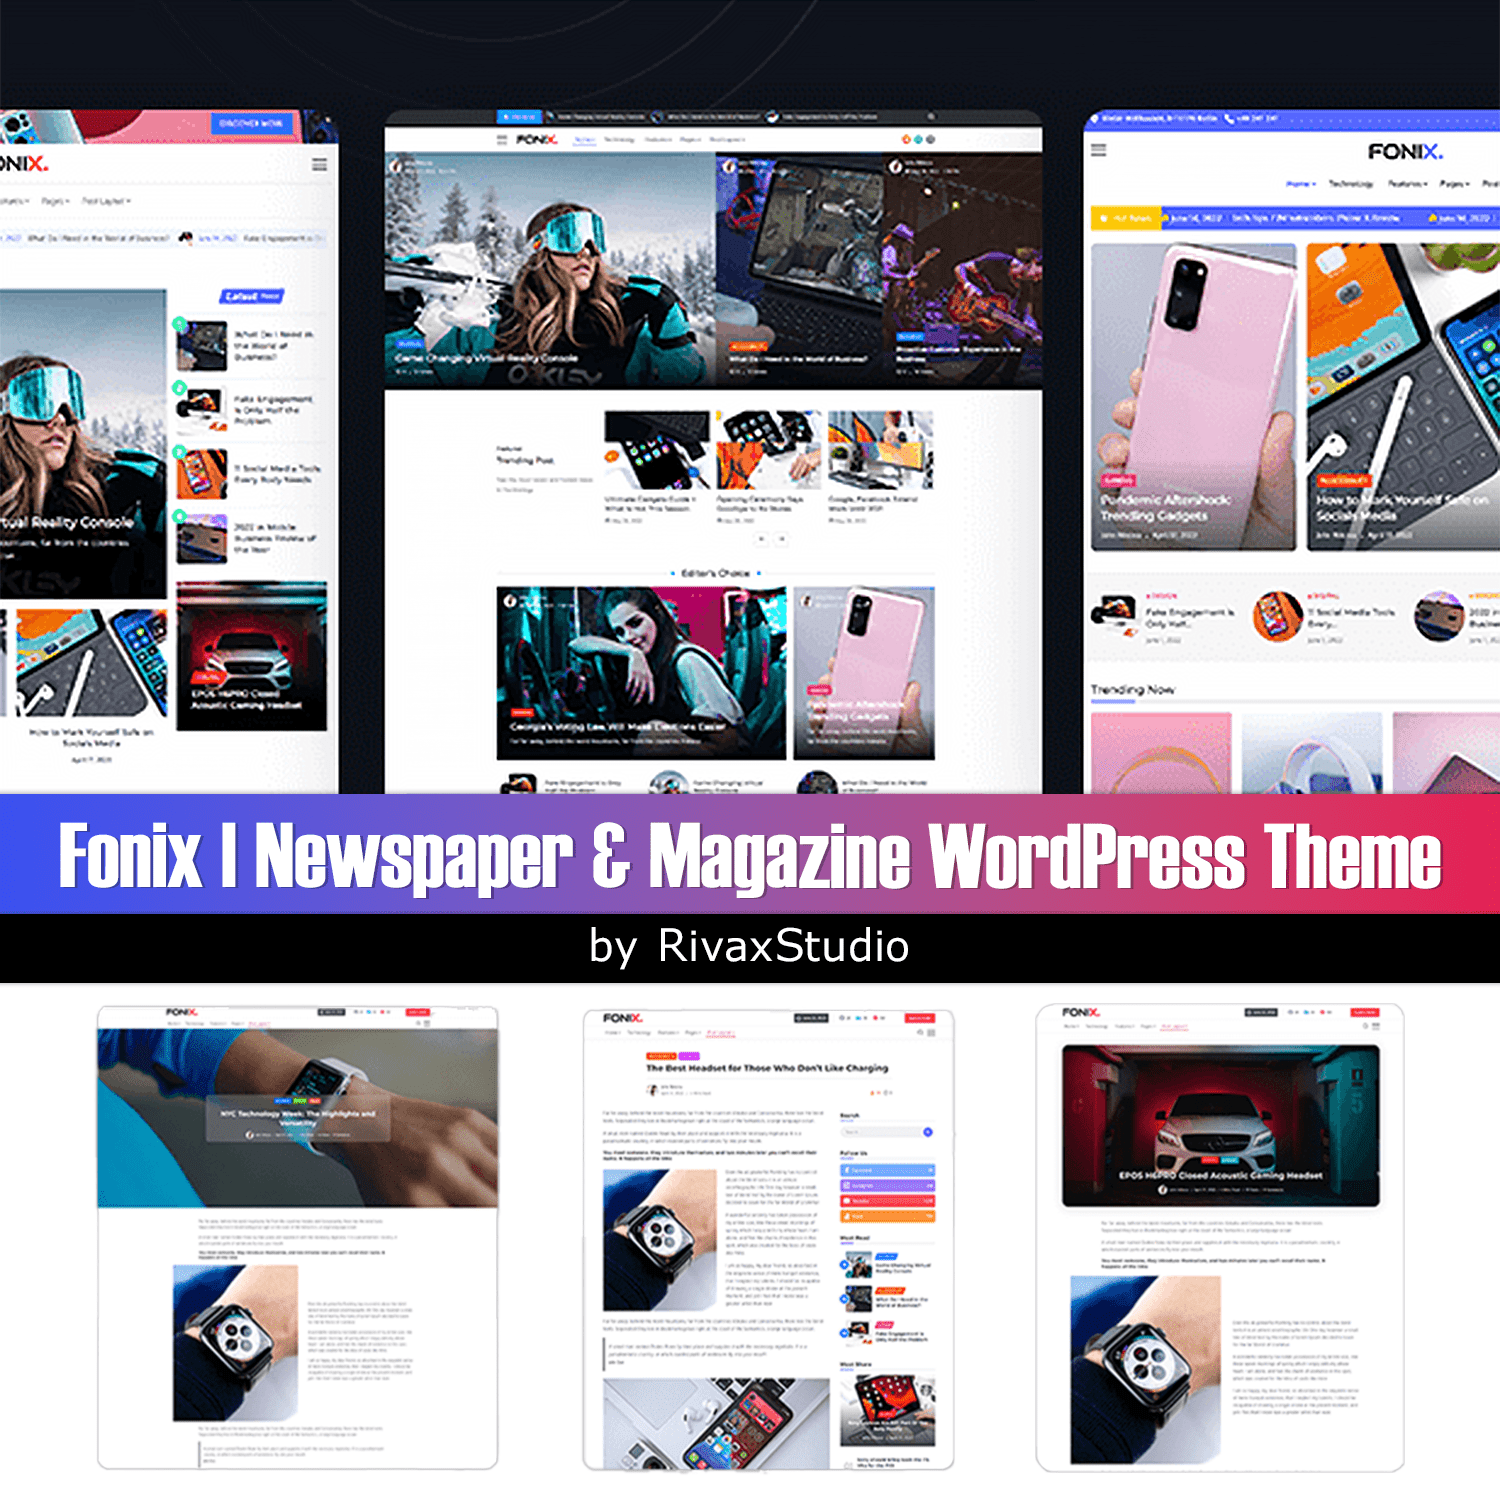 Fonix is the best of newspapers and magazines wordpress theme.